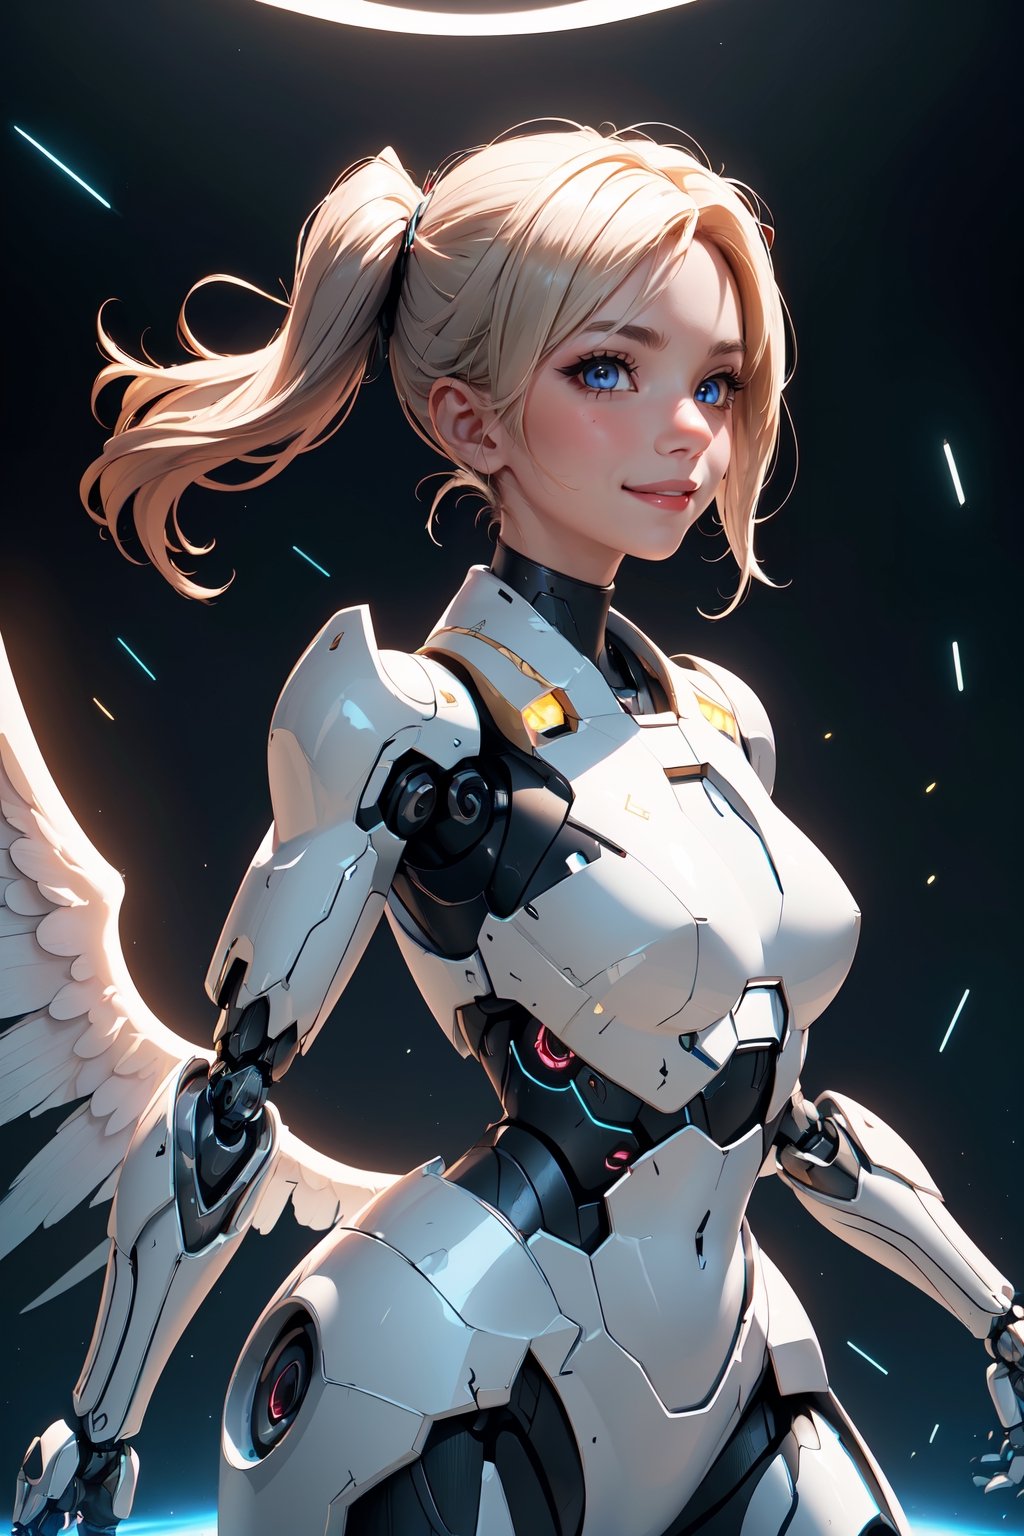 (Cowboy shot:1.2),(Wide Angle Shot), (Long Shot:1.3), (Intricate details:1.4), (Masterpiece) , ((Anime Robot, Beautiful Golem, ((White Skin)), Angel, 1girl, Magic)), (Perfect Aesthetic Eyes:1.3) , (Detailed Eyes) , (Halo:1.2) , (Elden ring:1.3), (Mechanical Wings), (Wings:1.3), Glowing, Twintails Hair, Multicolored Hair, (Perfect Hands:1.1), (Anatomically Correct Body:1.4), (Perfect Face), Majestic Guardian Knight | Ultra Detailed Robotic Armor | Cinematic Lighting | Intricate filigree metal design | 16k | Unreal Engine 5 | Octane Render | 3d, (anatomically correct :1.4), (In the Holographics Hyperspace Metaverse 50mm, Ultra Detailed, Fantasy Background, Blush, Solo), (Fighting Stance:1.3), (Magic circle:1.3), Lightning Effect, (Ray Tracing), Show Your Ability A.I., (Glowing Eyes) , (Particles Glowing) , 16k Wallpaper, Robot Female,